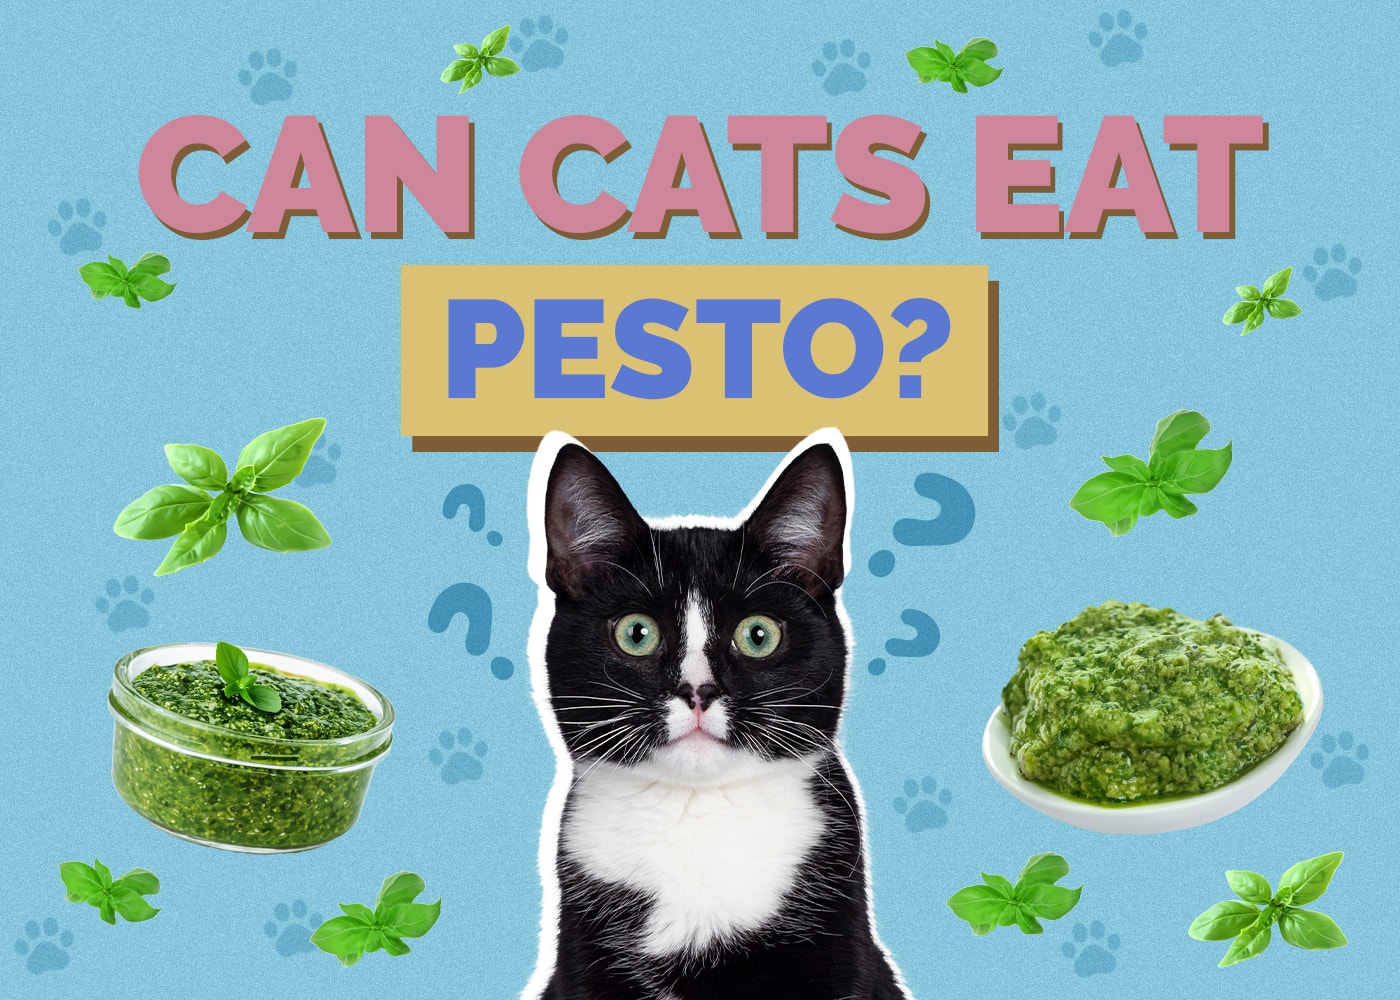 Can Cats Eat pesto